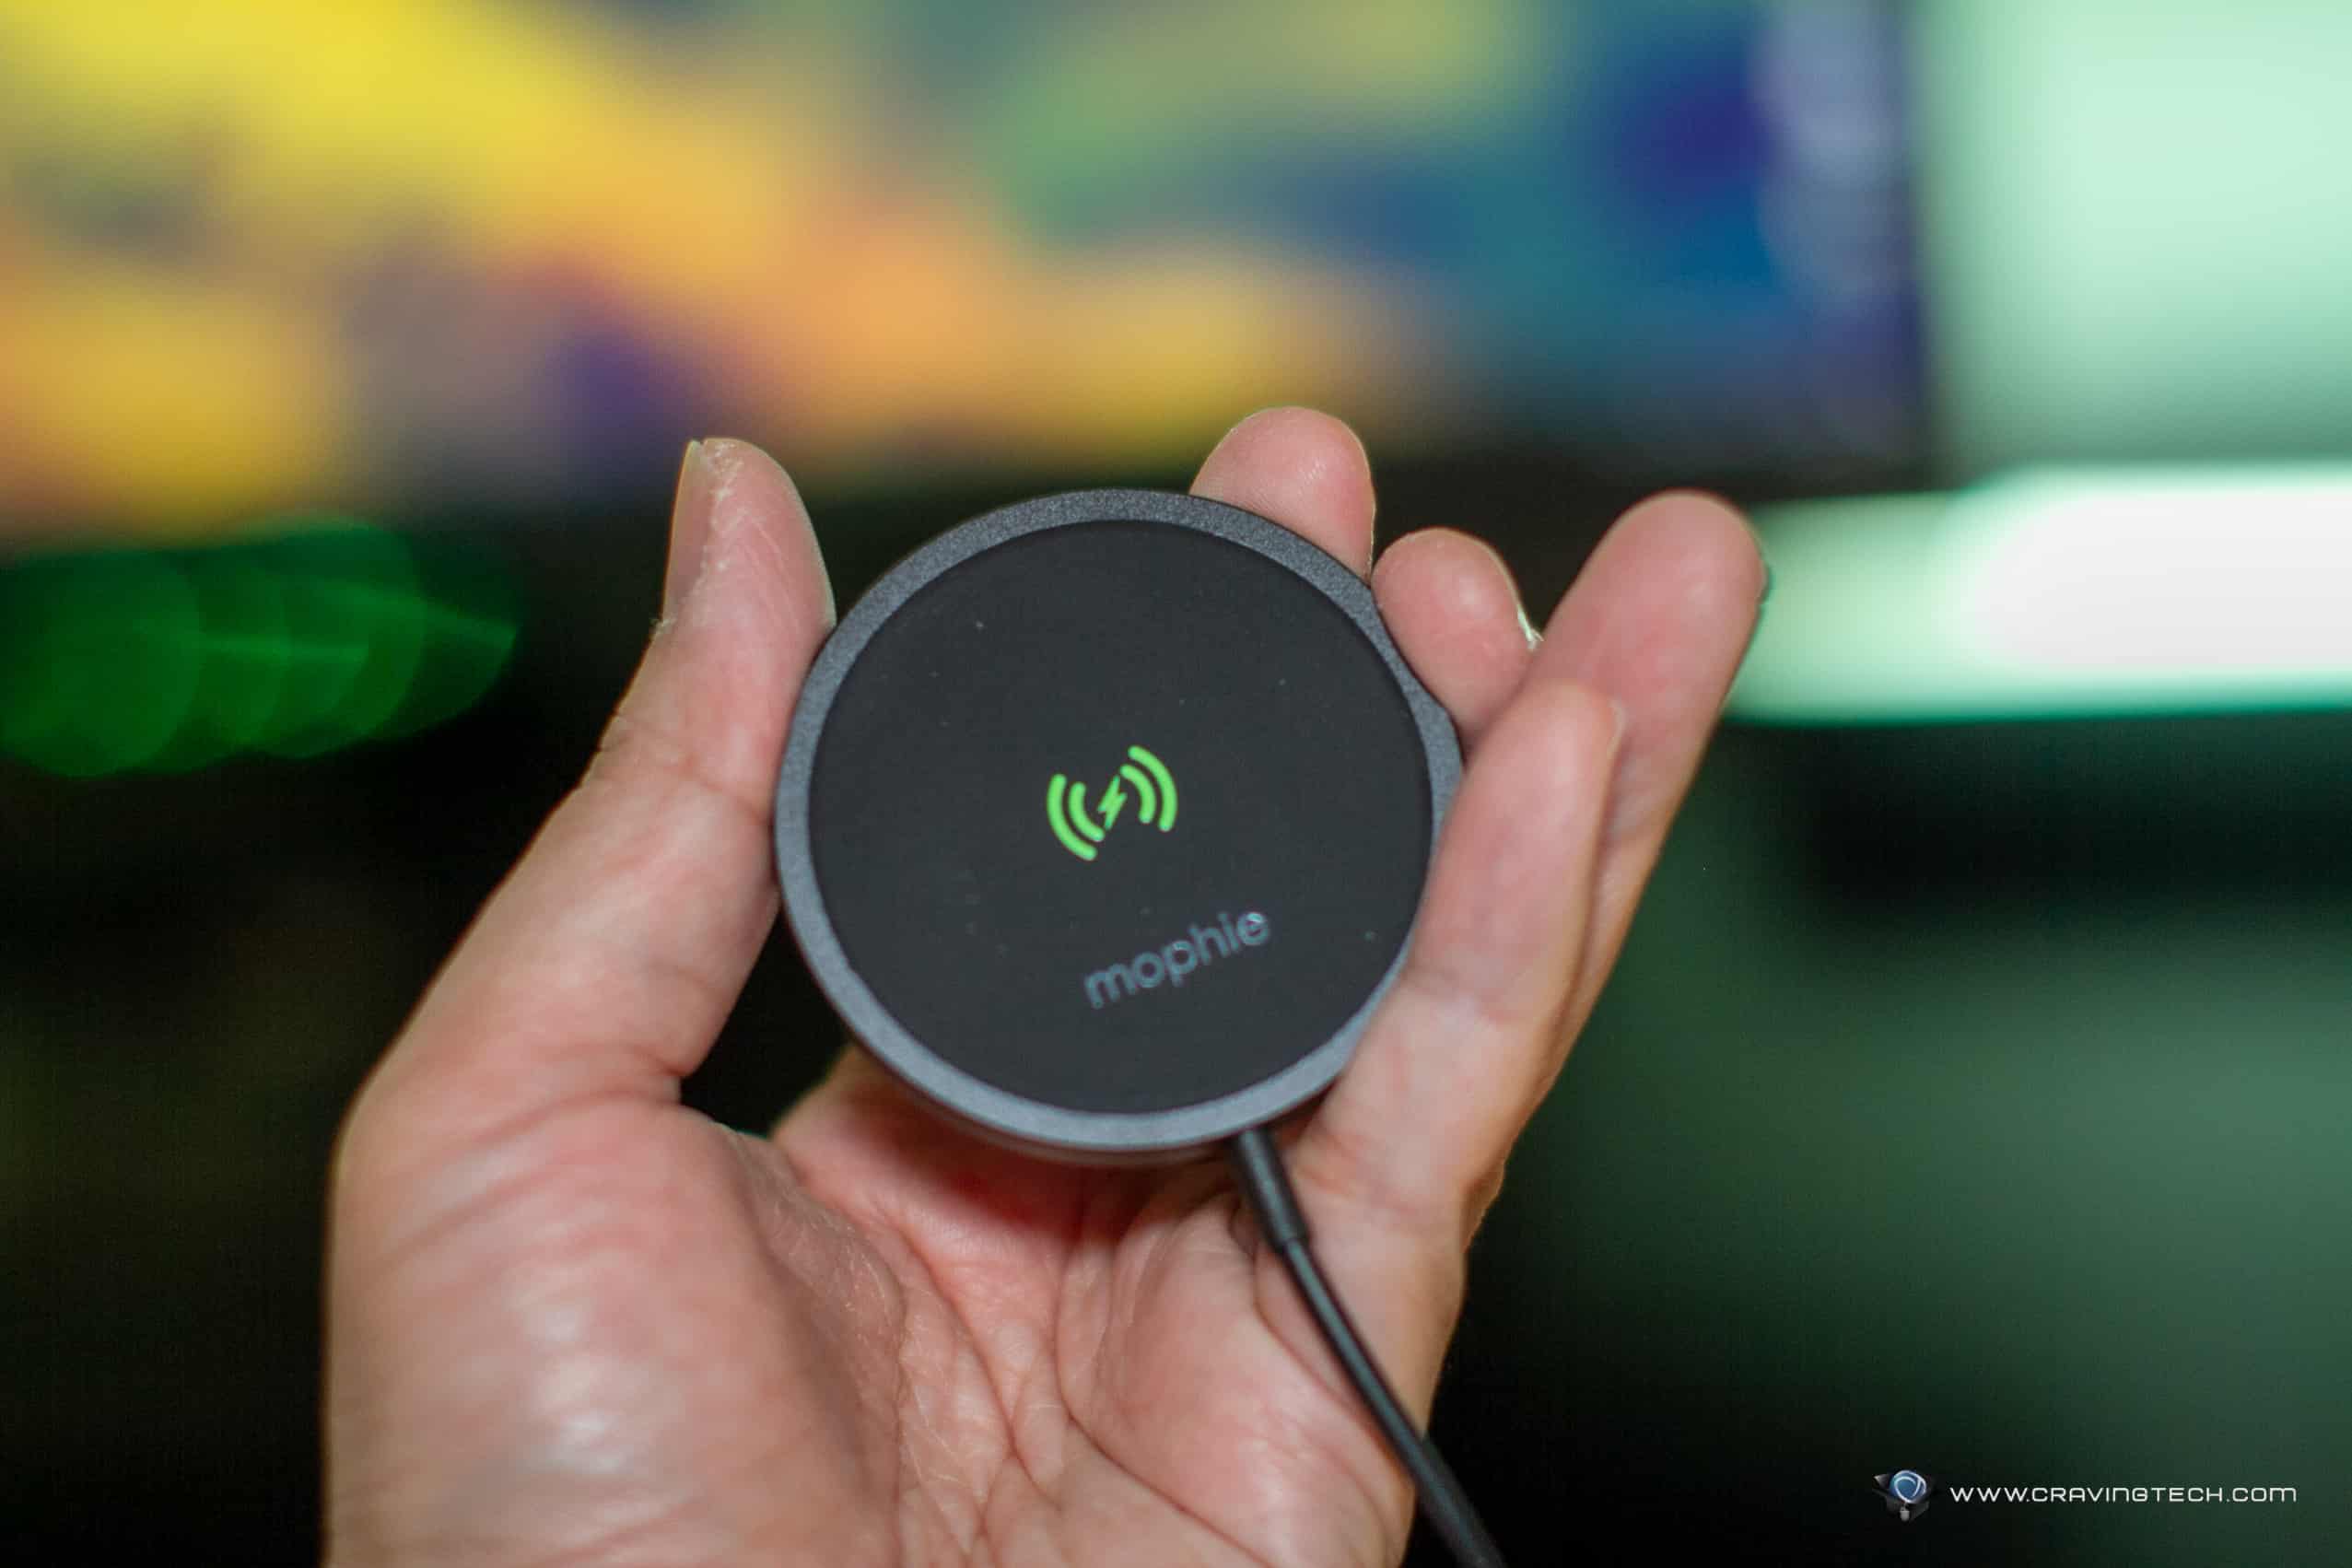 mophie’s simple, MagSafe, wireless charger for the iPhone